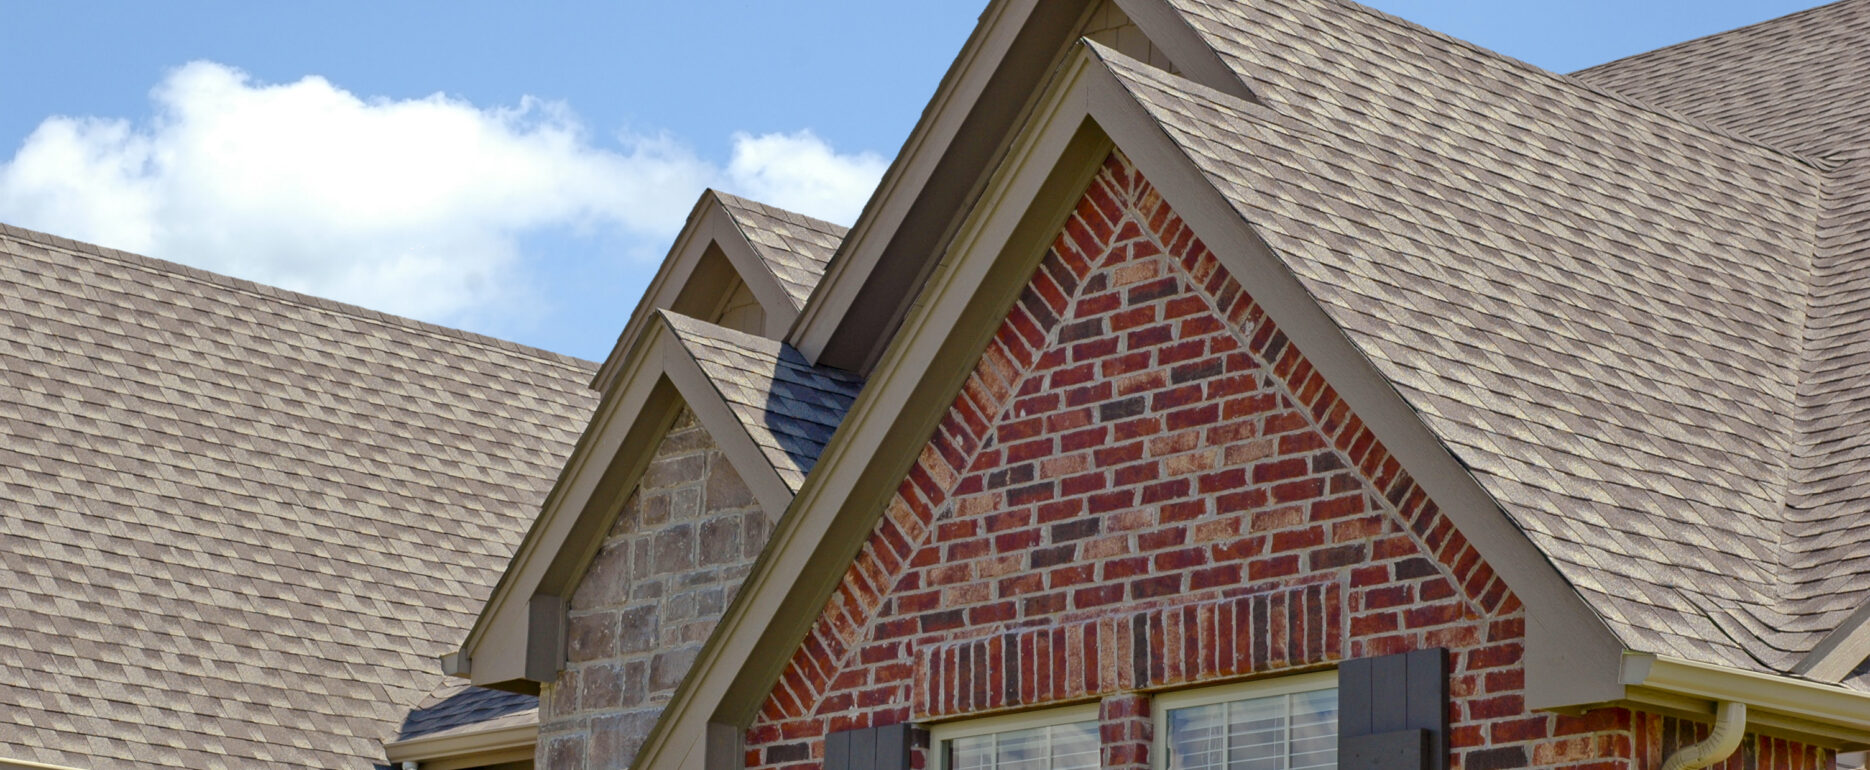 top 10 faqs about installing a new roof on a house featured image